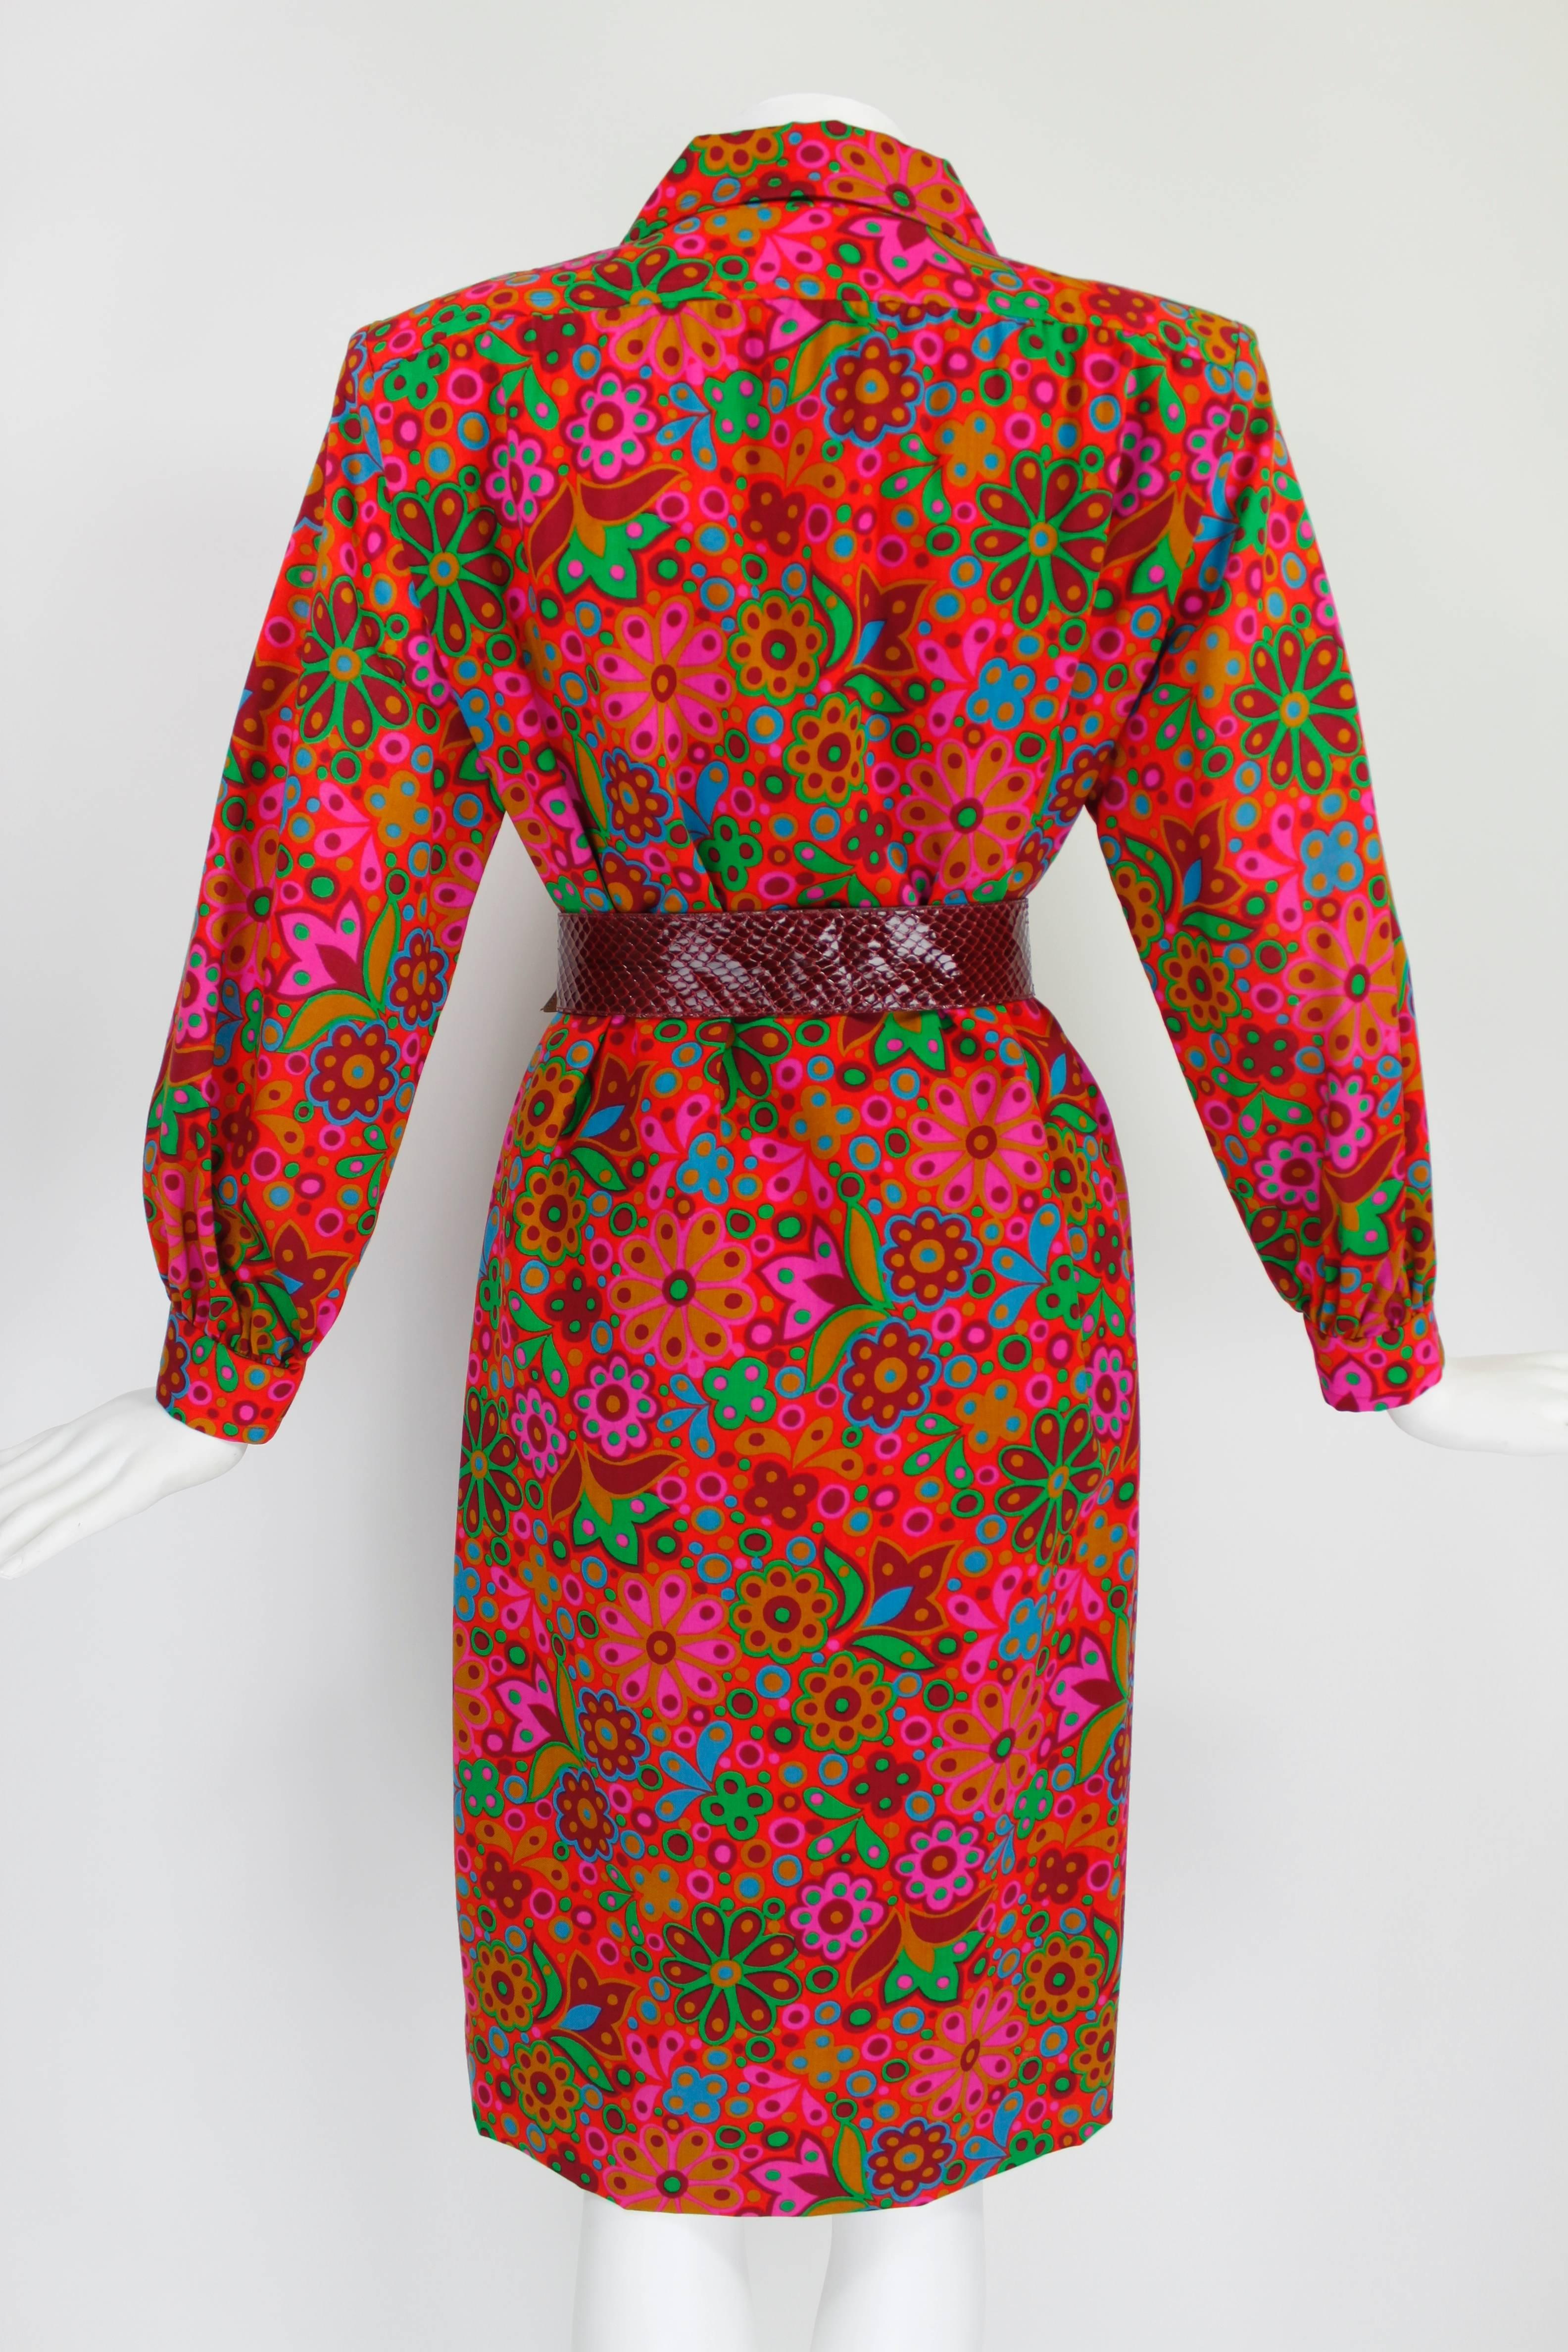 1970s YSL Electric Red Mod Floral Print Dress with Snakeskin Belt 4